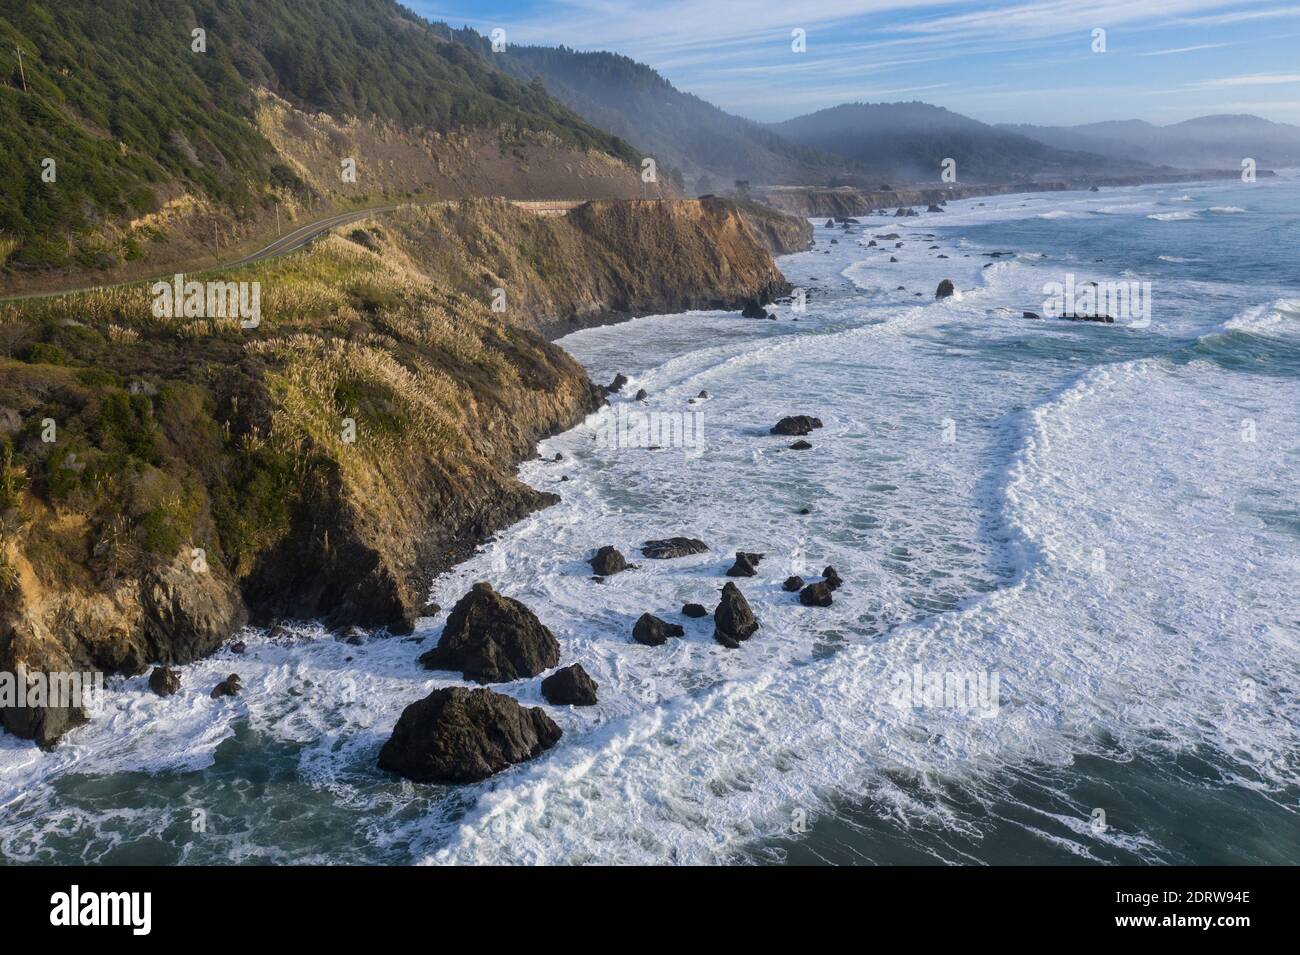 The cold, nutrient-rich waters of the Pacific Ocean beat against the rocky and incredibly scenic coastline of Northern California in Mendocino. Stock Photo